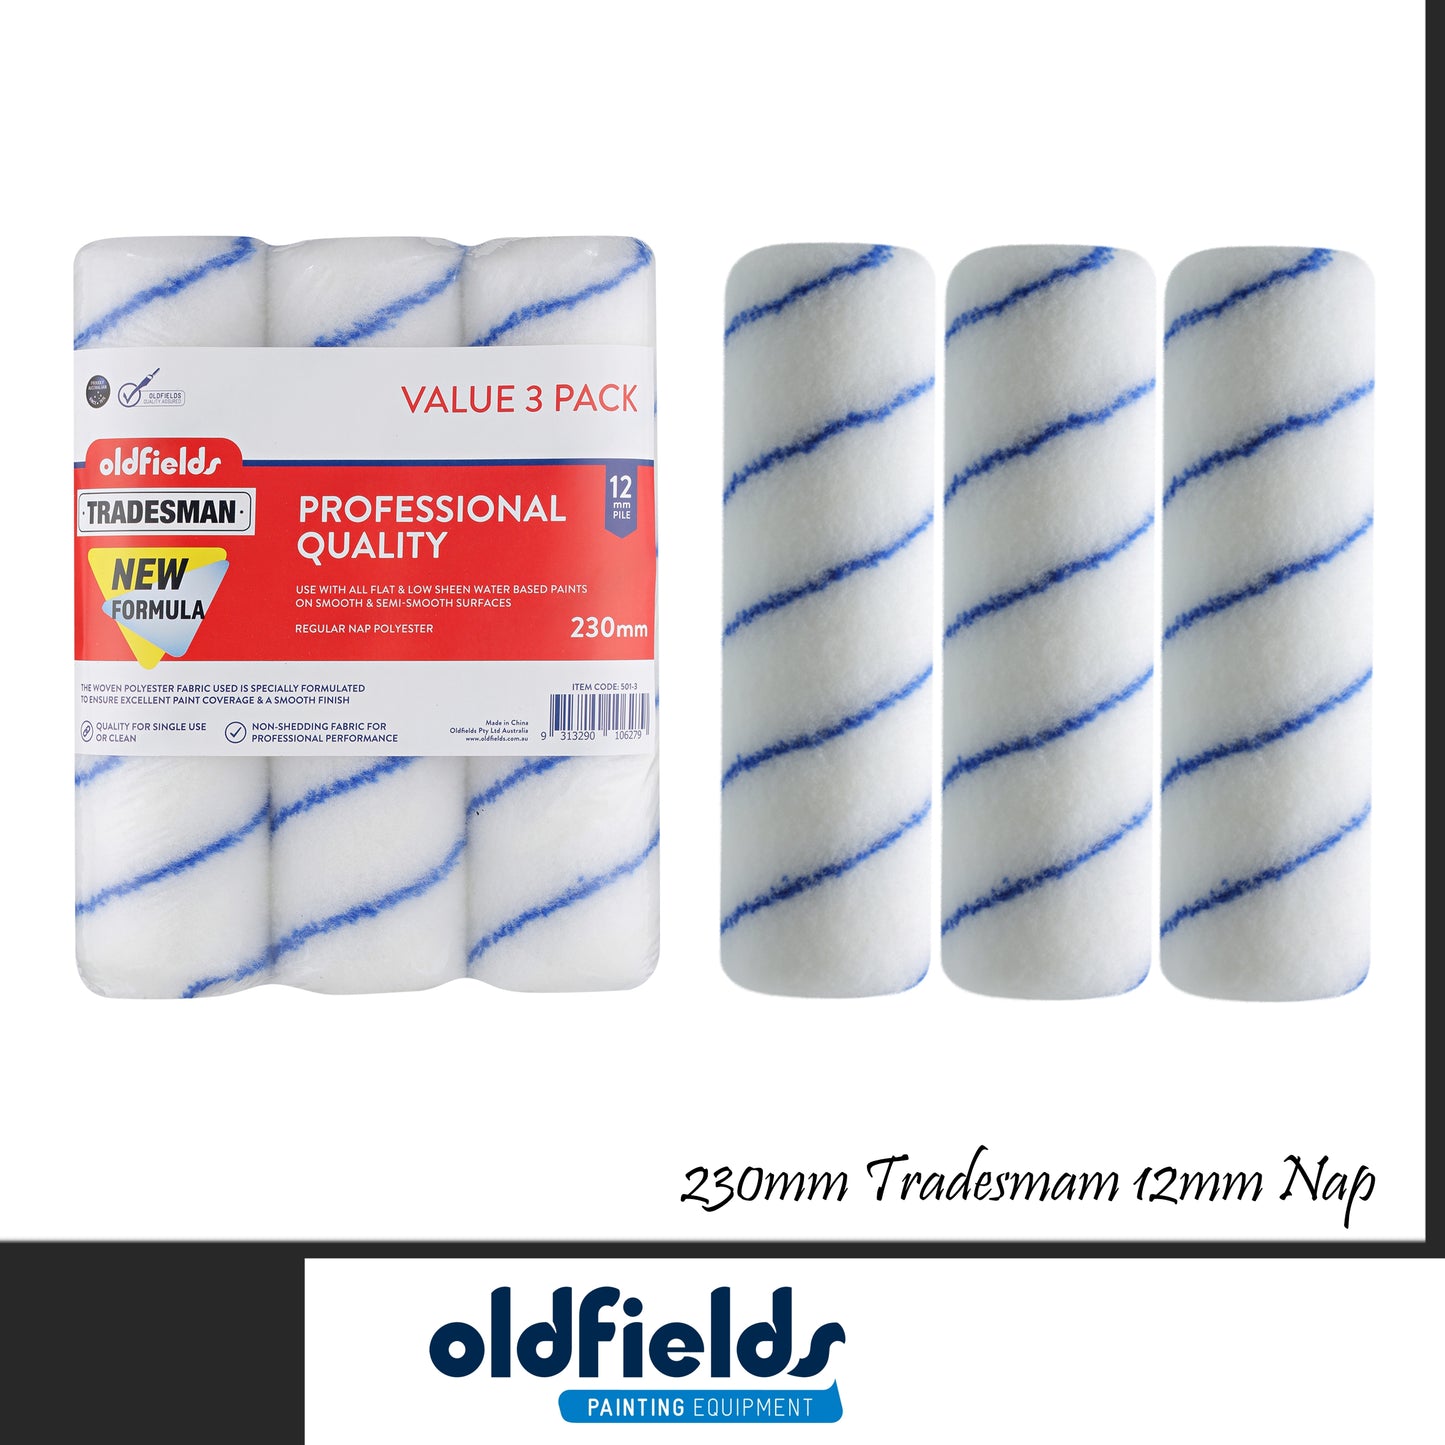 Tradesman 6 Pack Roller sleeves 12mm nap (230mm and 270mm) by Oldfields - Da Vinci Chalk Paint & Rustic home decor